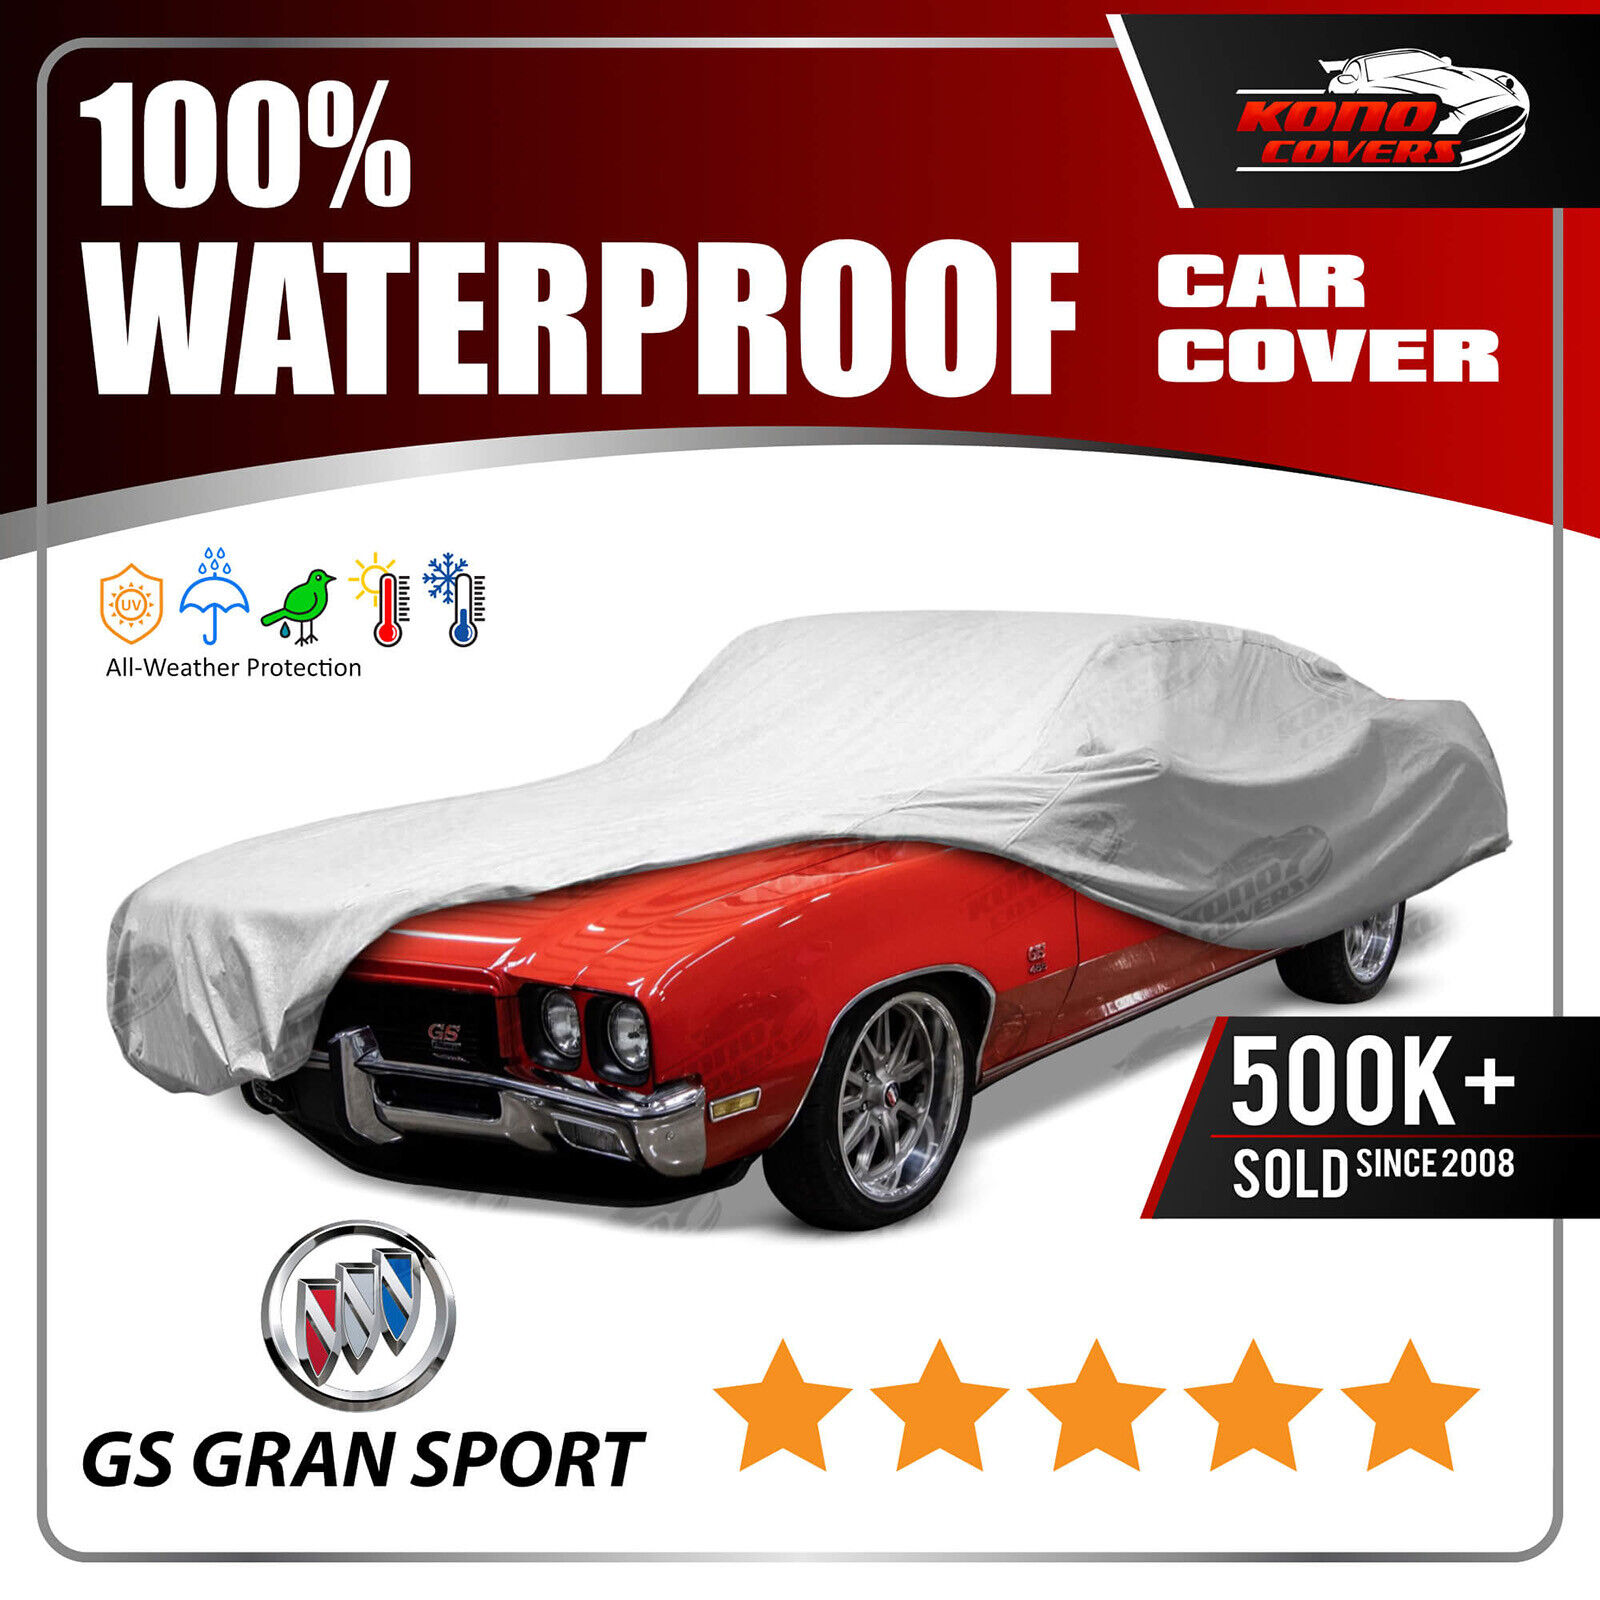 BUICK GS GRAN SPORT 1965-1972 CAR COVER - 100% Waterproof 100% Breathable